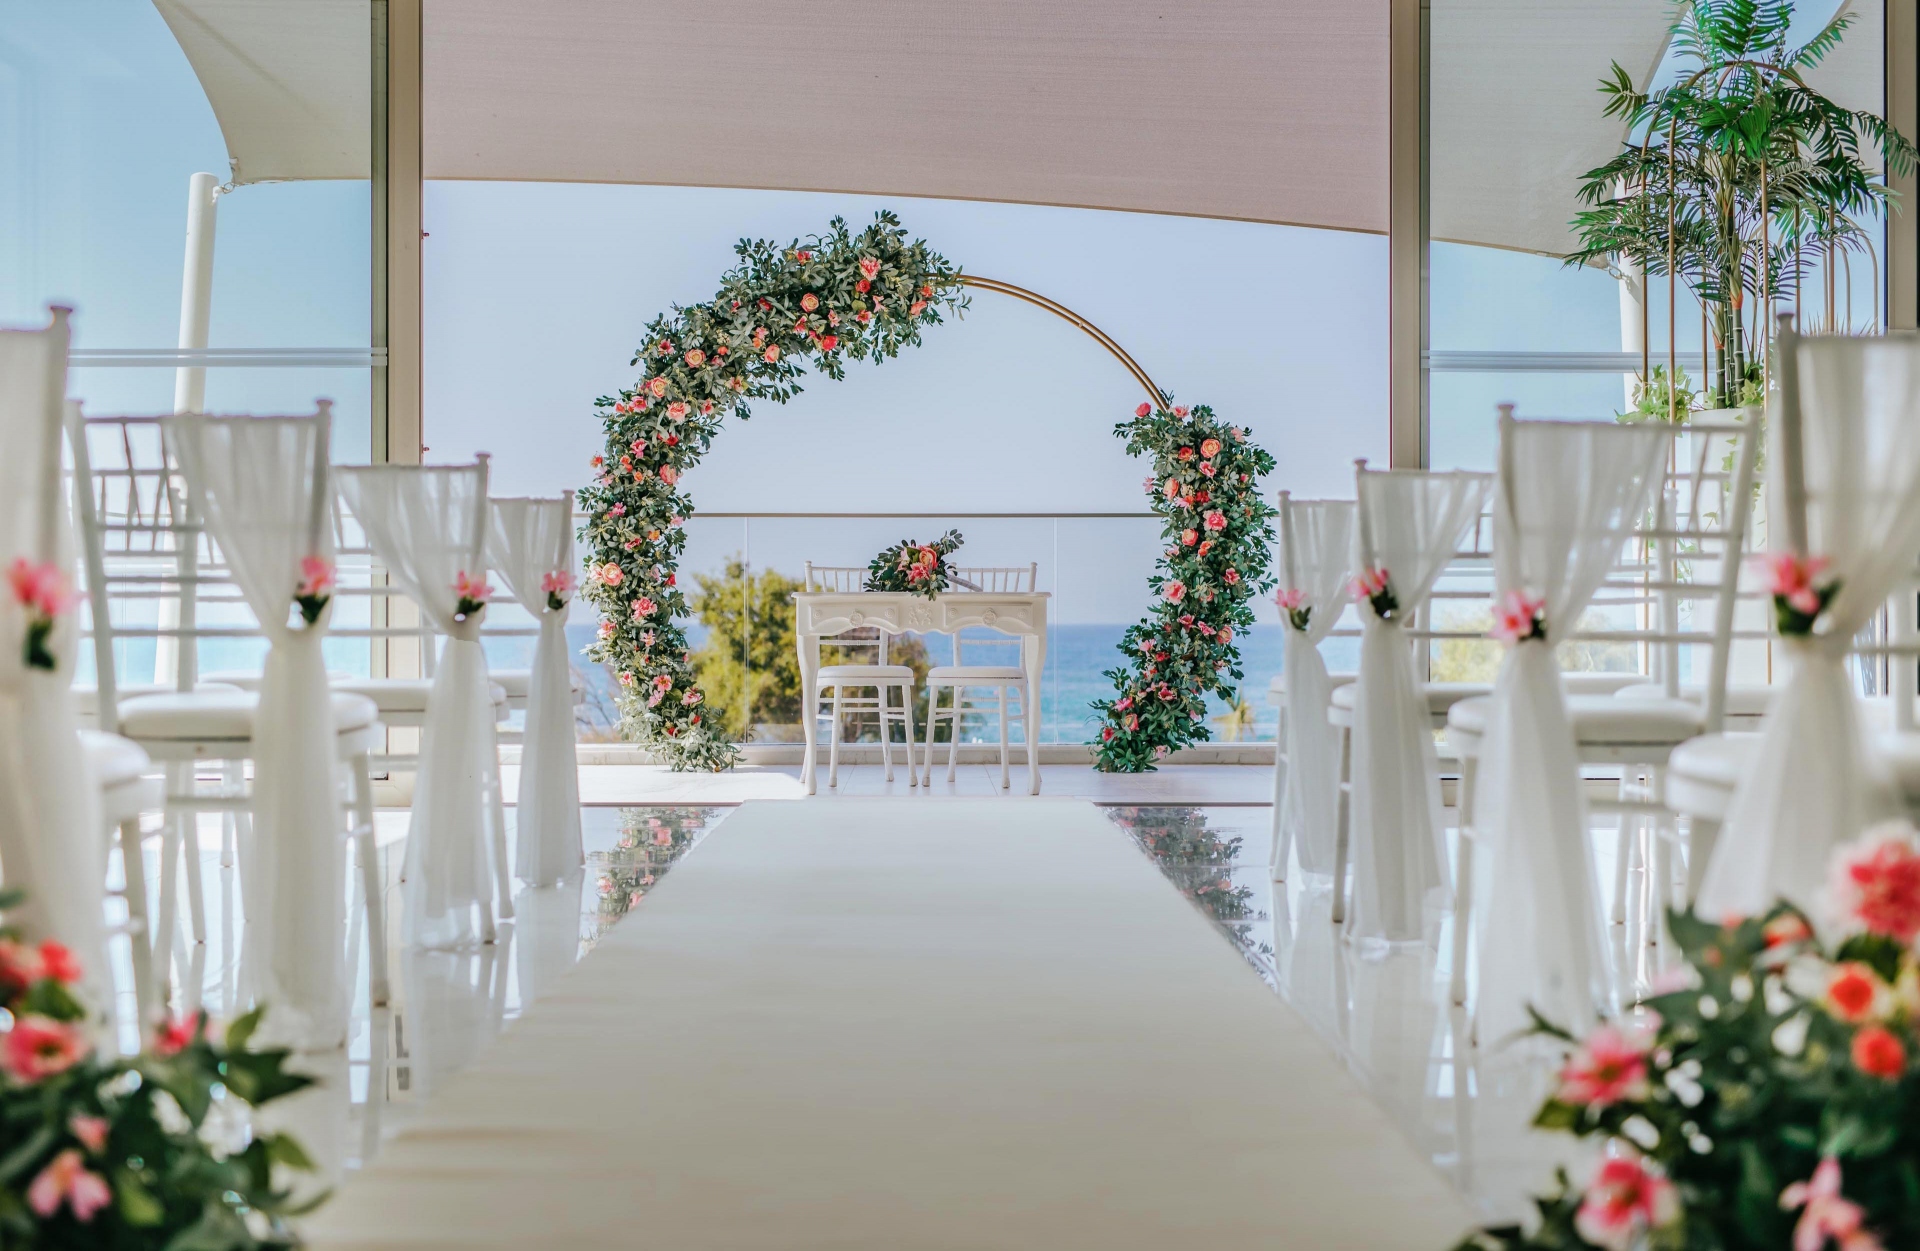 Book your wedding day in Louis Ivi Mare